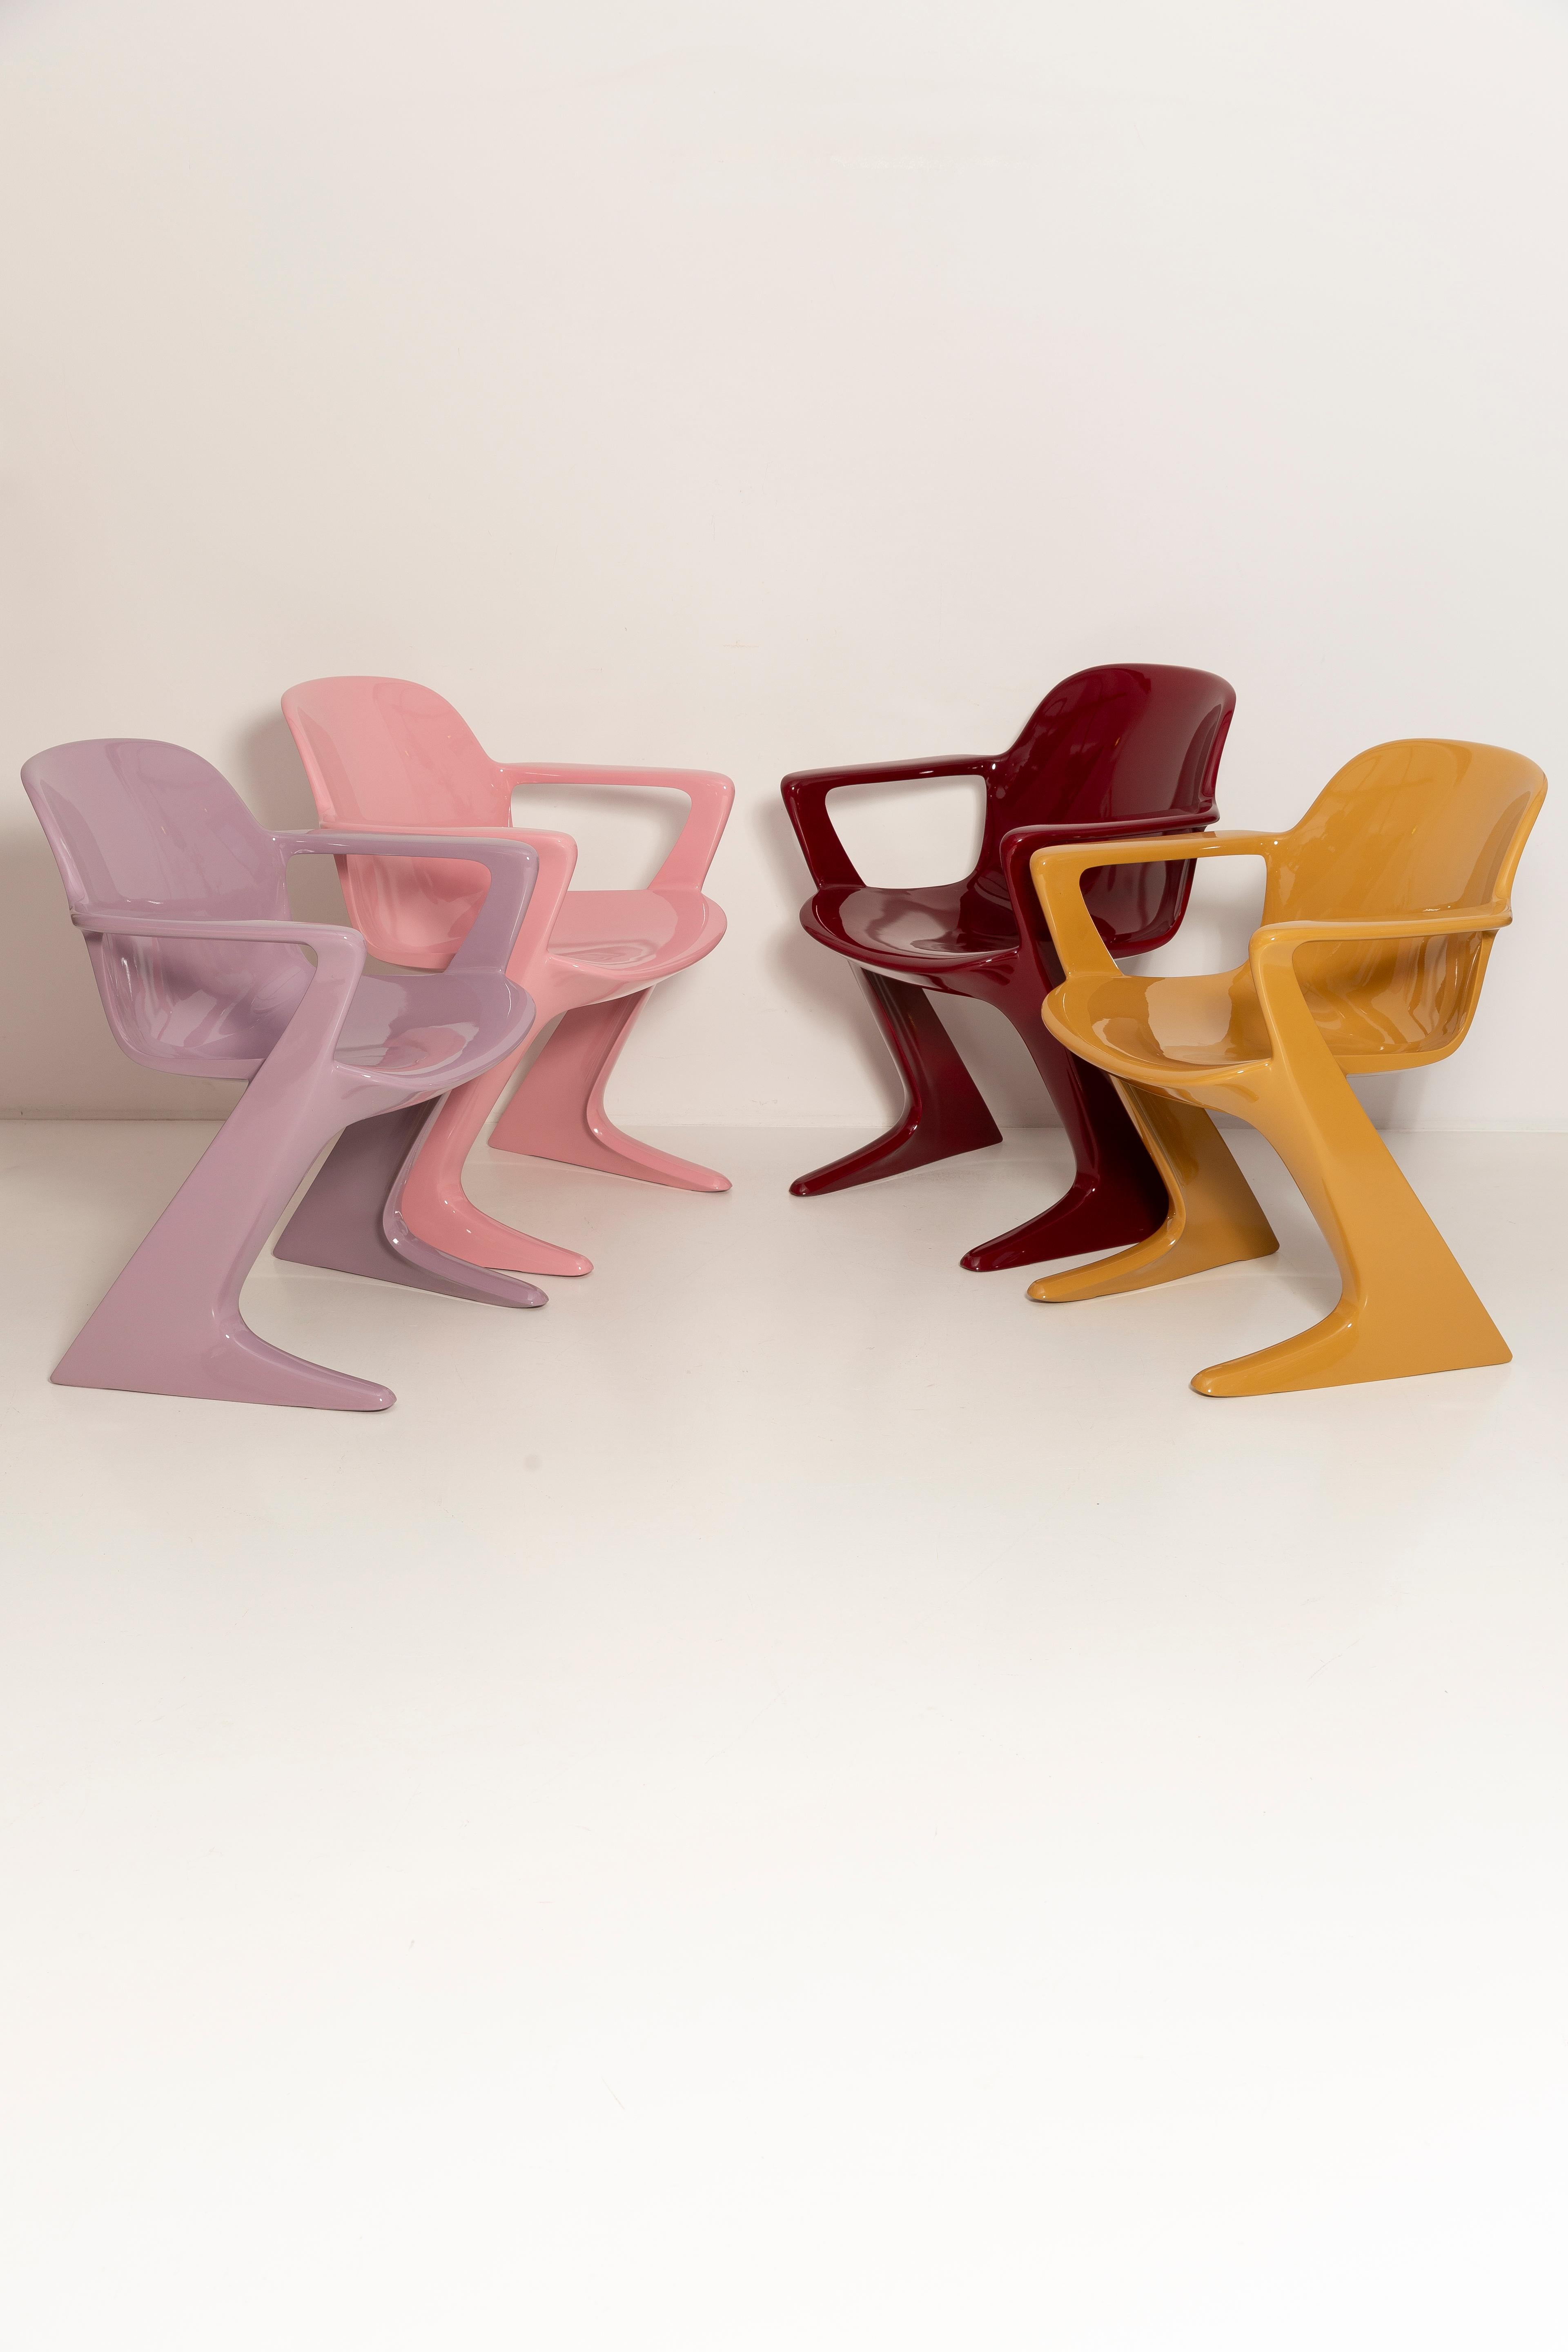 Set of Three Mid Century Kangaroo Chairs, Ernst Moeckl, Germany, 1968 For Sale 8